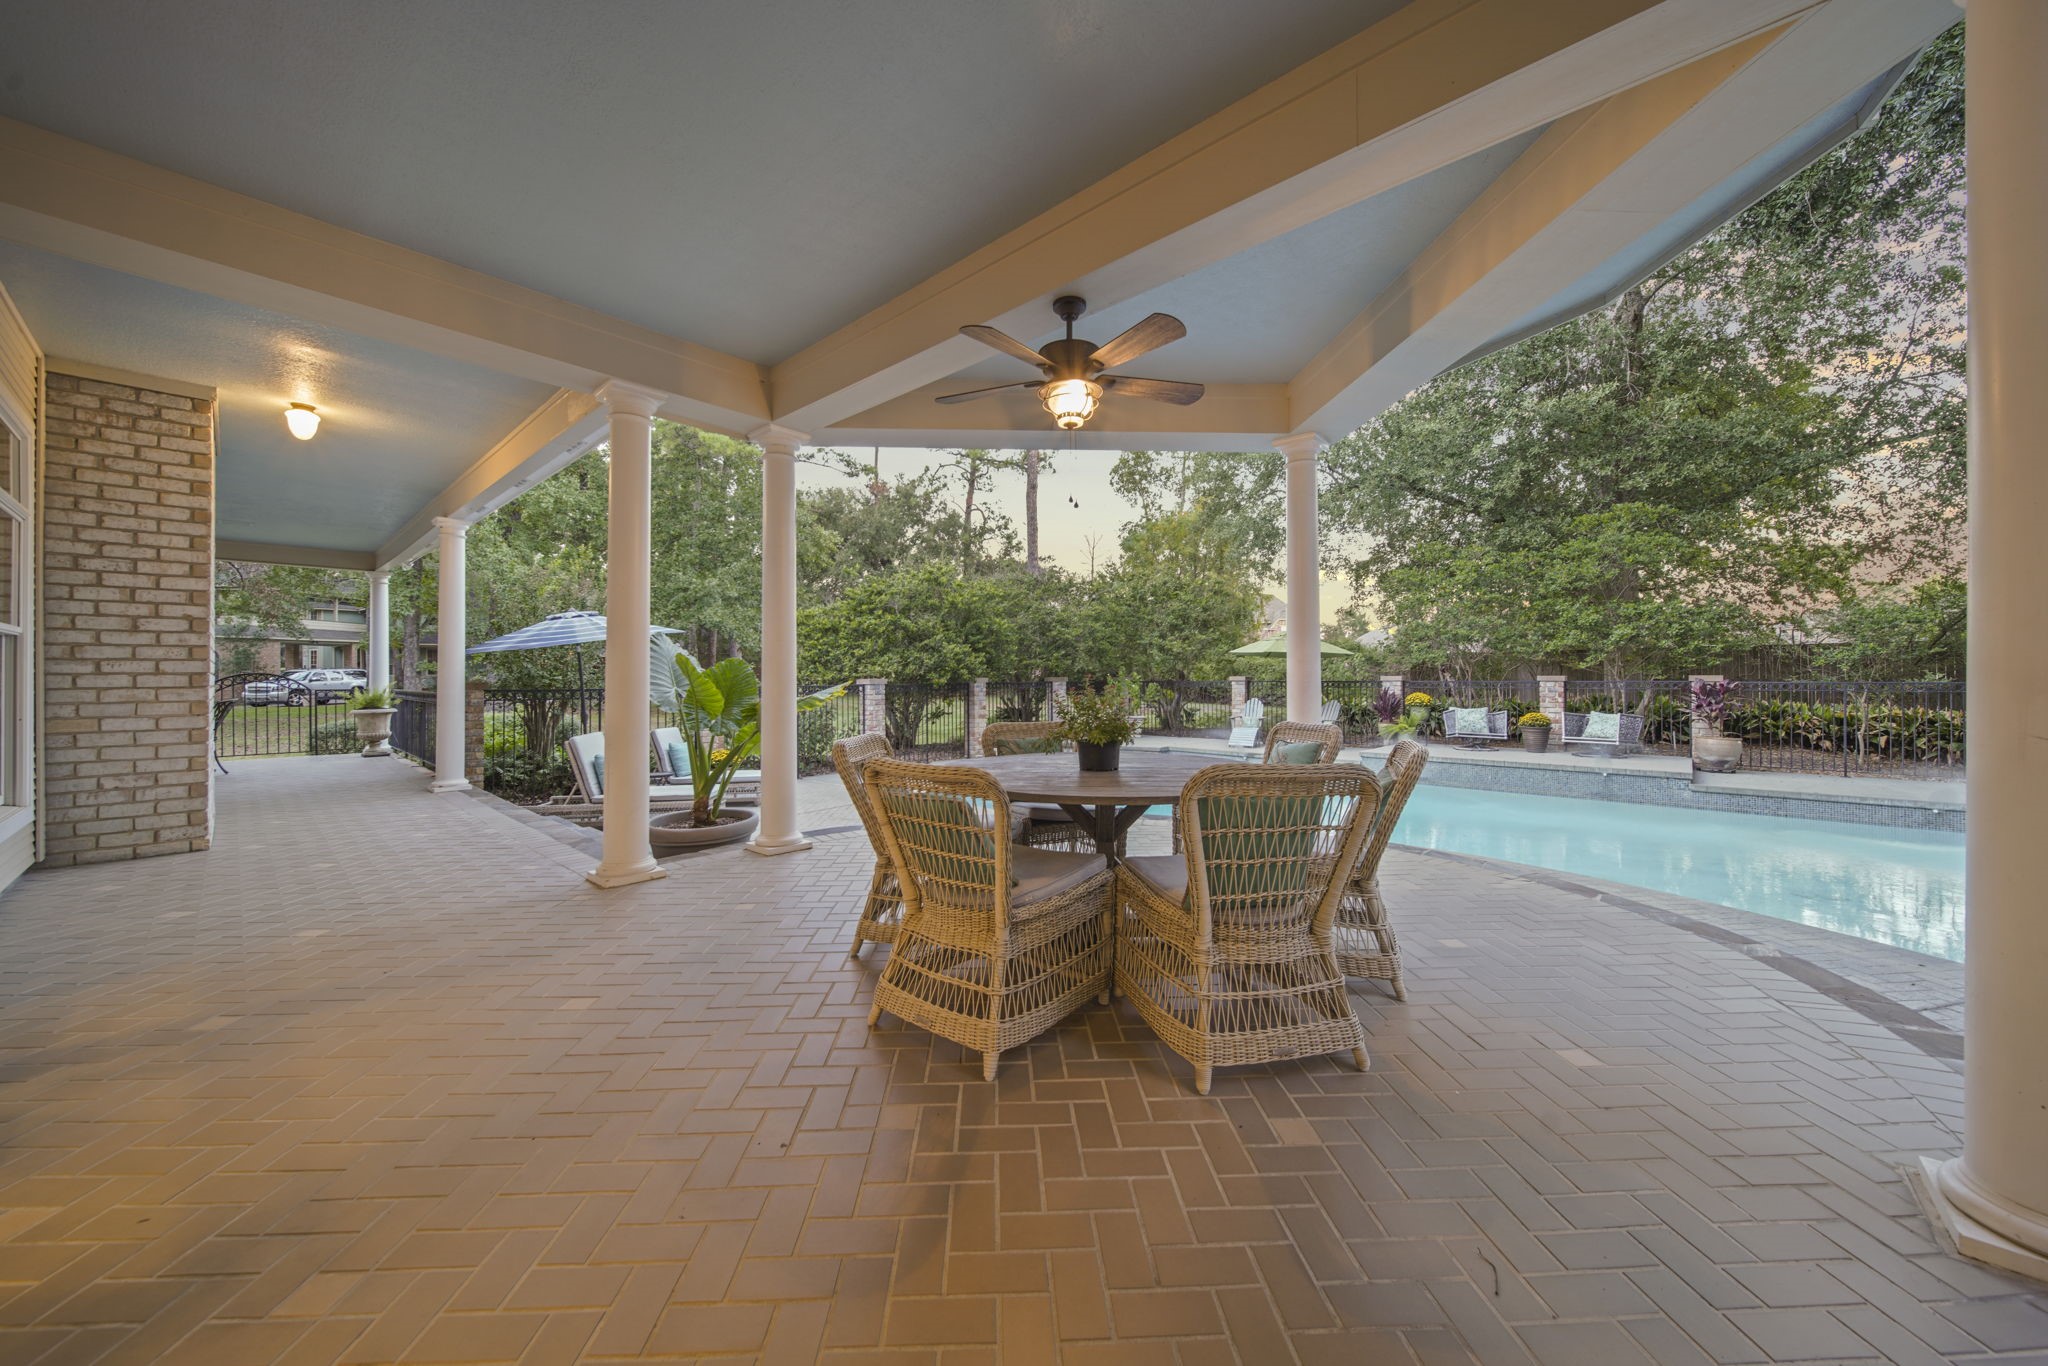 Beautiful outdoor covered area with a ceiling fan & view of the pool.